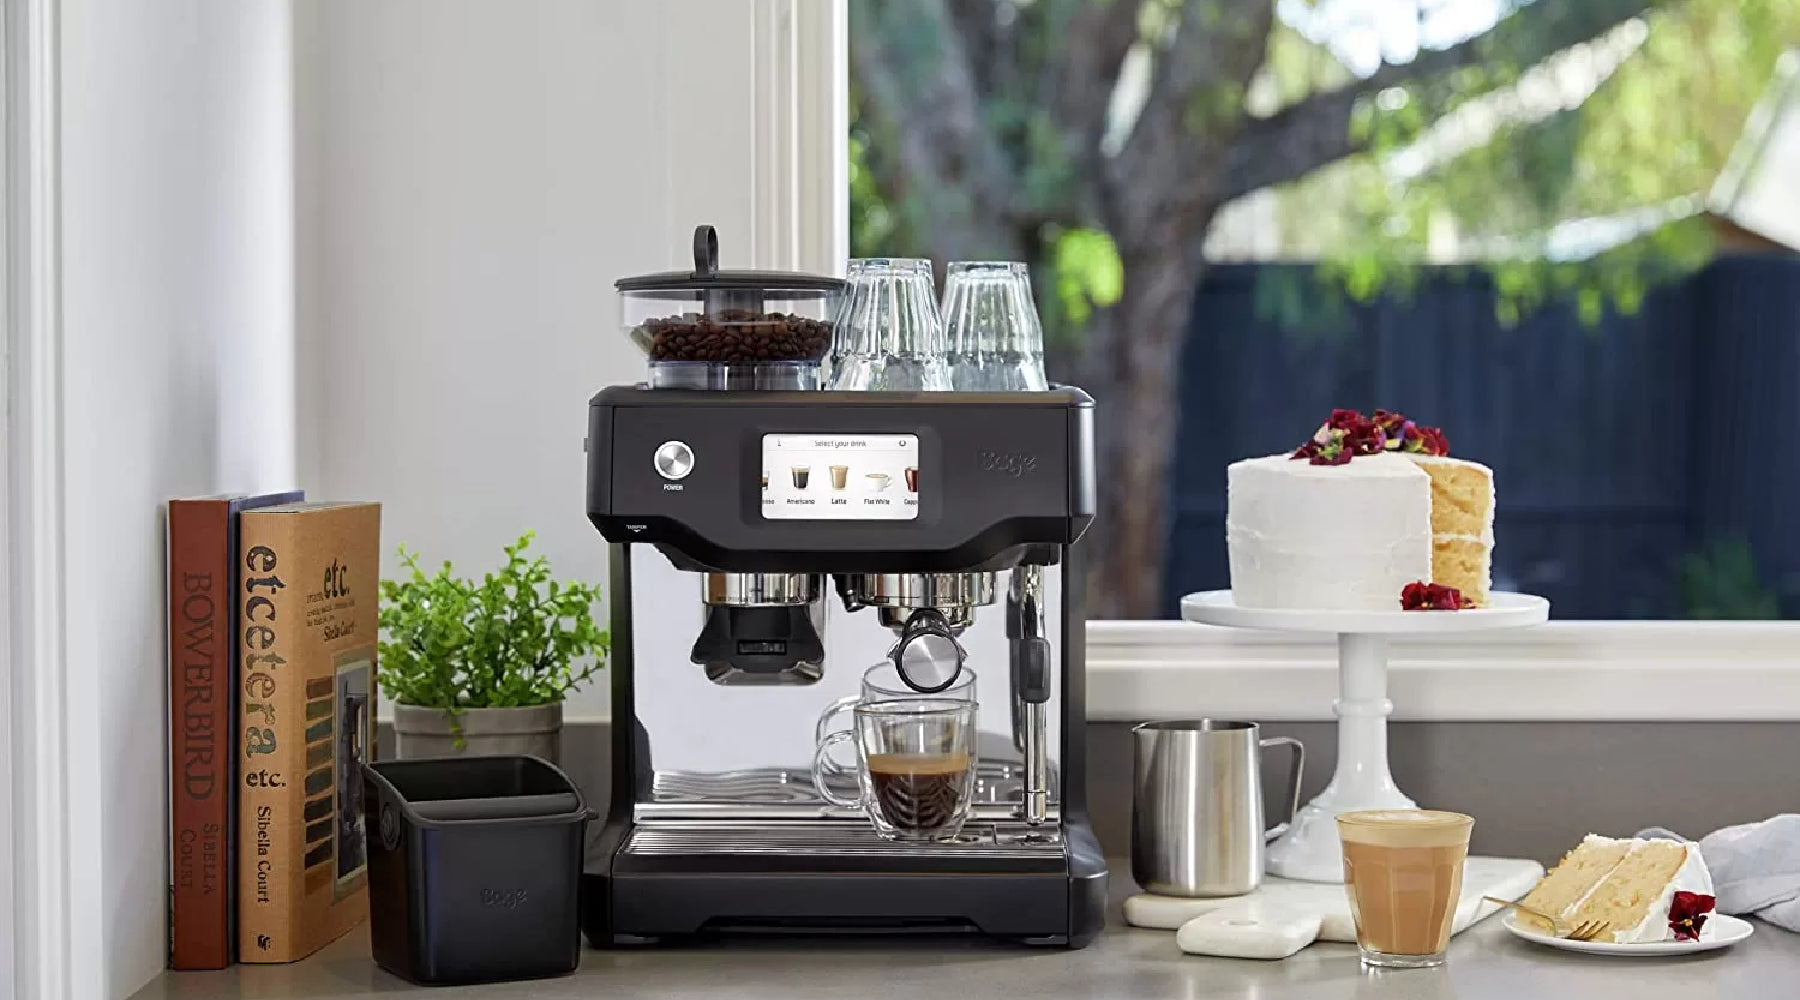 A CUP ABOVE THE REST: TOP TIPS FOR COFFEE MACHINE CONNOISSEURS